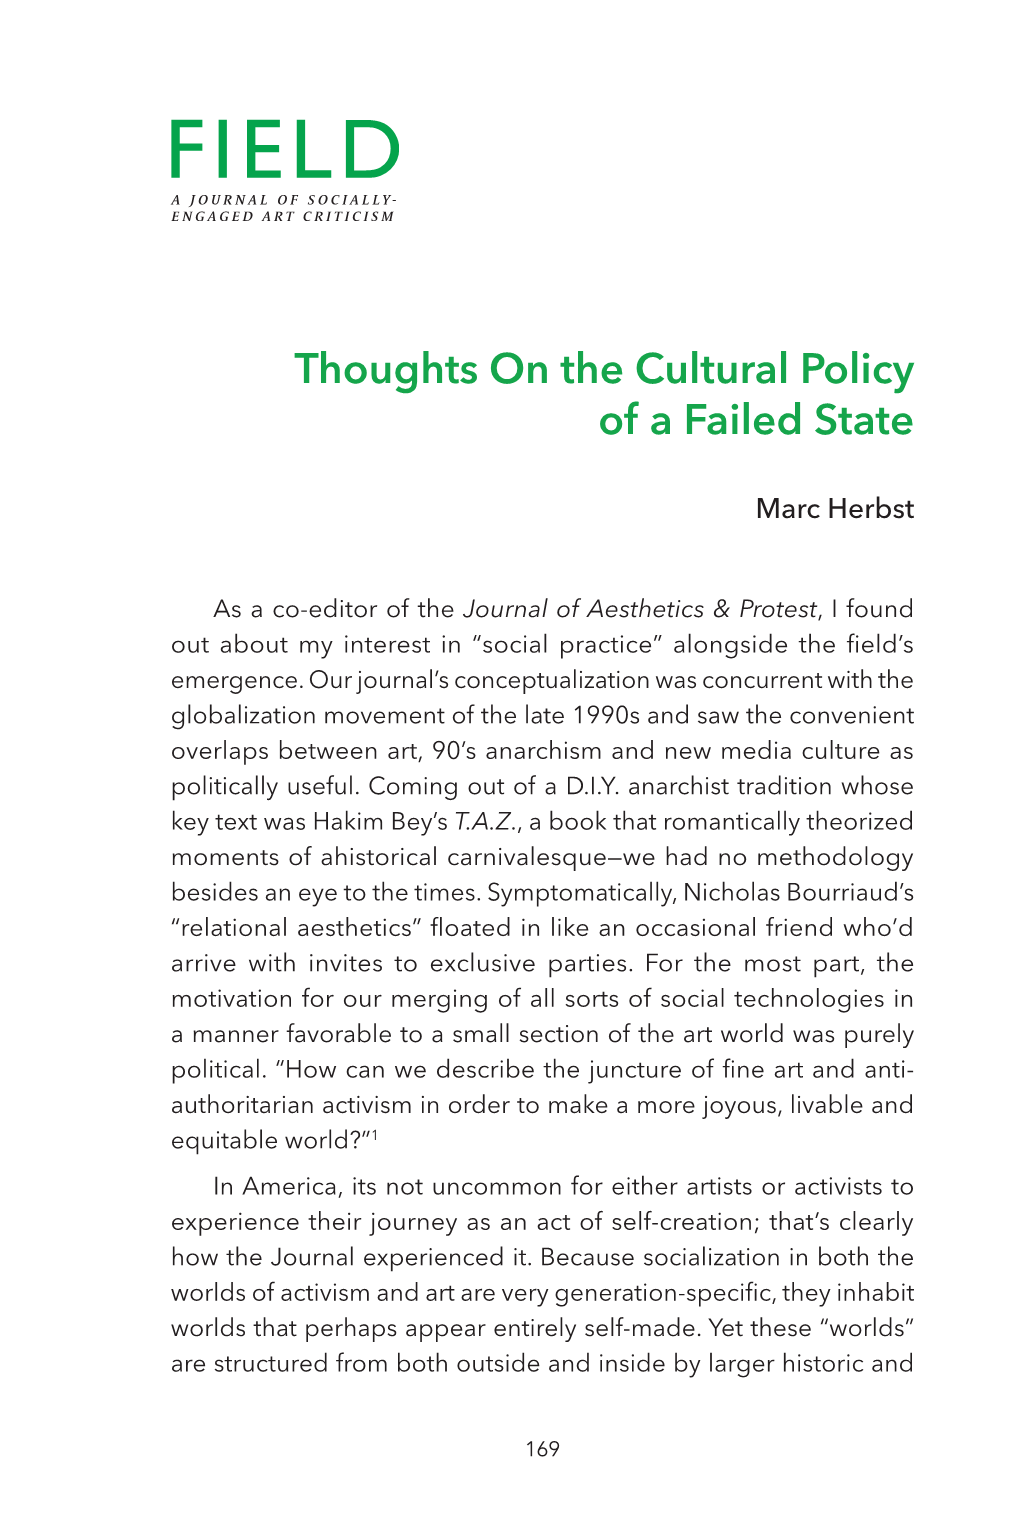 Thoughts on the Cultural Policy of a Failed State